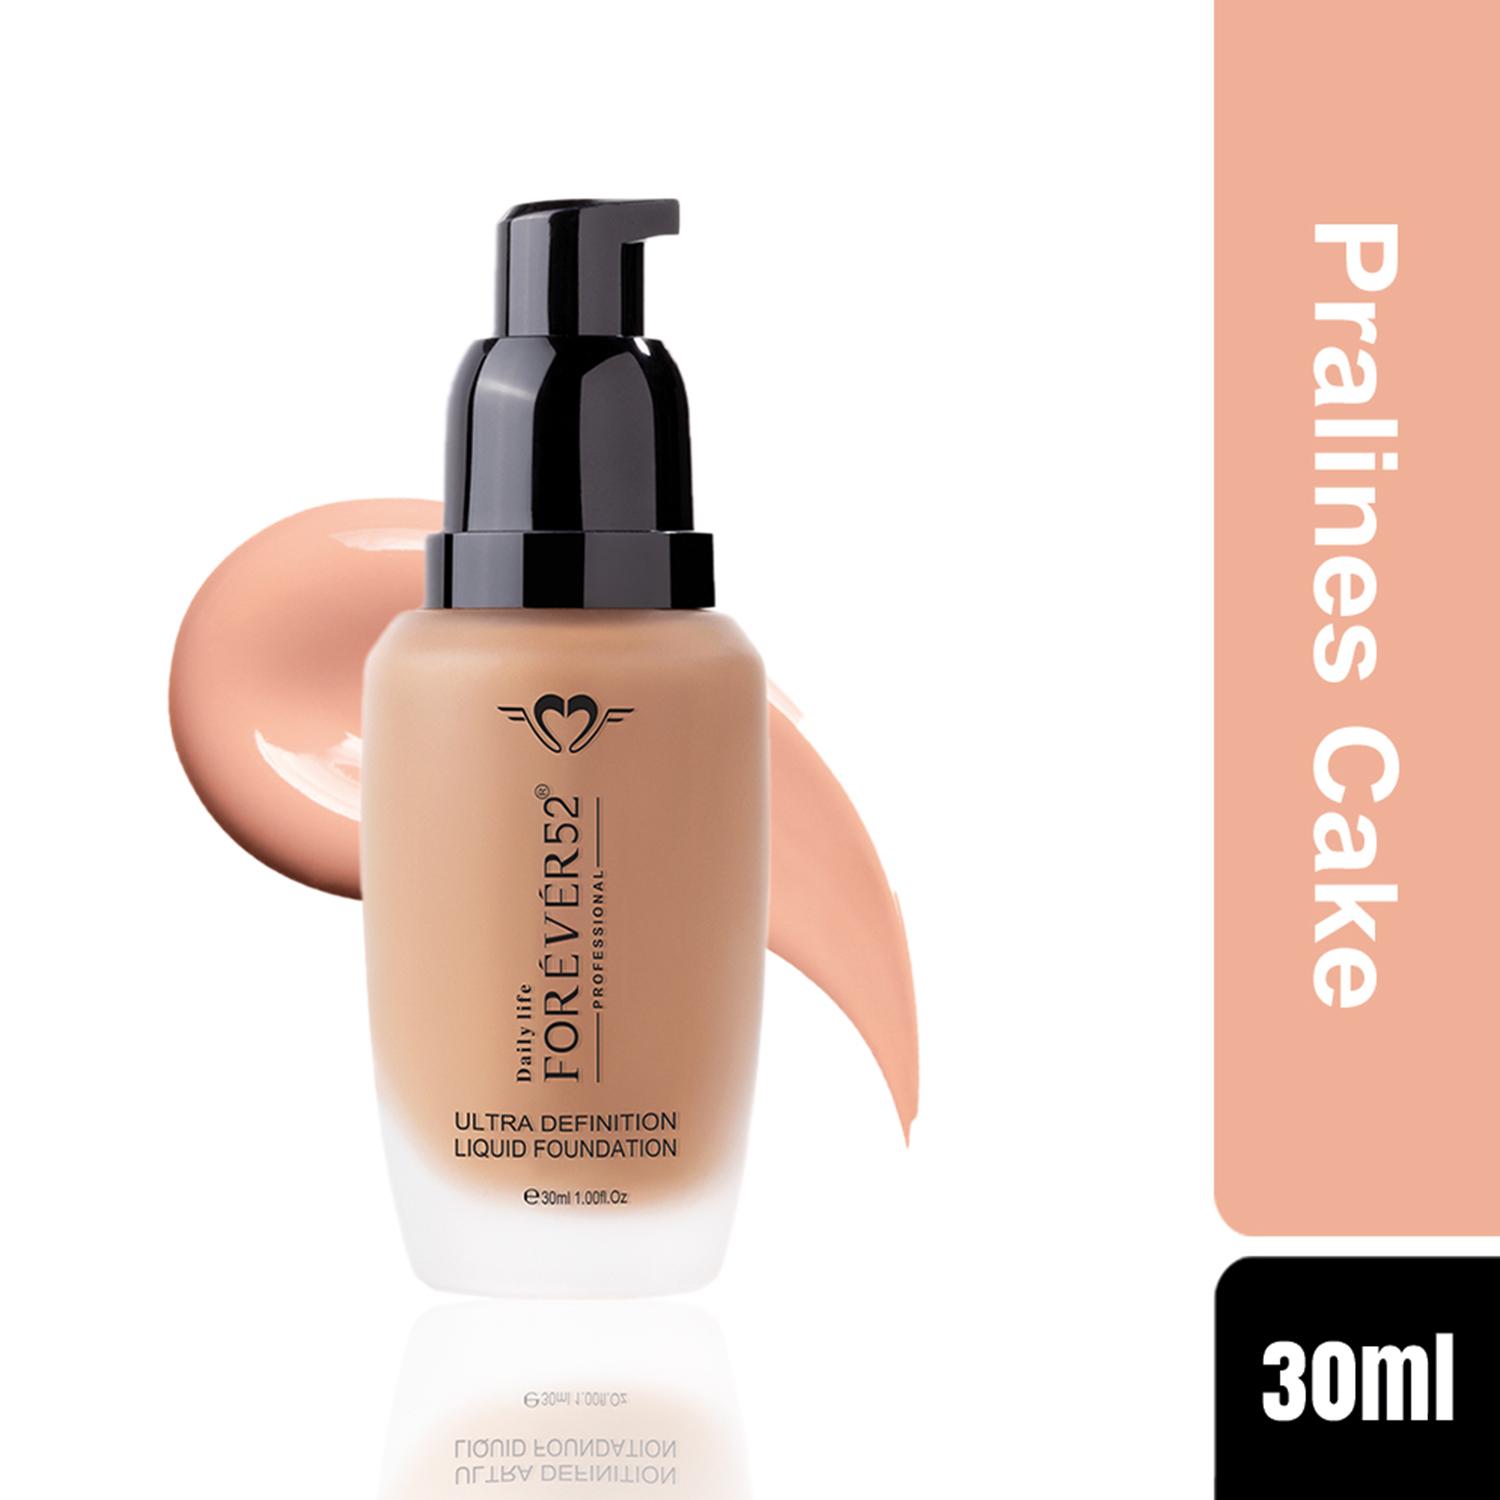 Daily Life Forever52 | Daily Life Forever52 Ultra Definition Liquid Foundation FLF006 - Pralines cake (30ml)